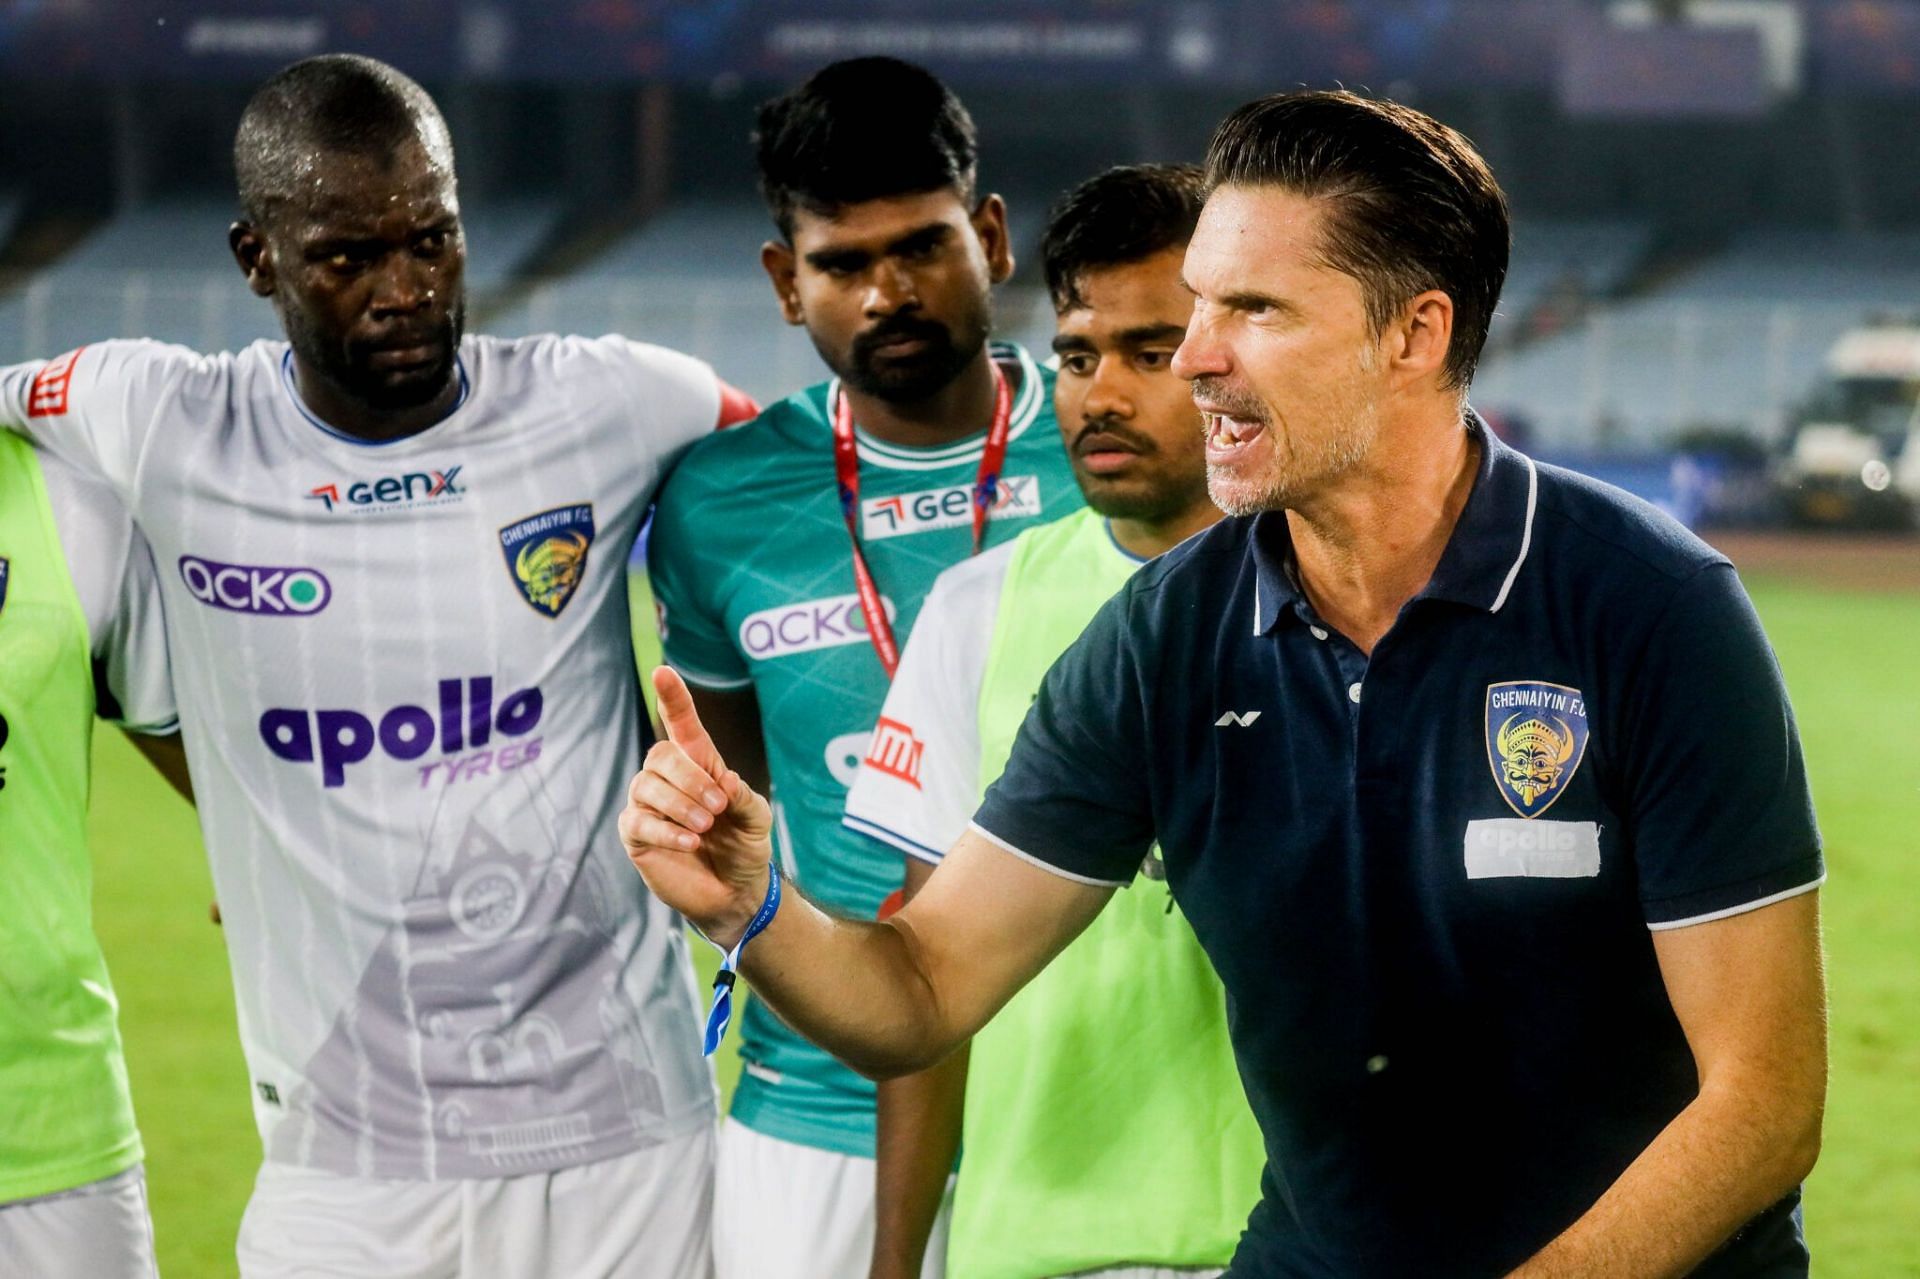 Chennaiyin FC coach Thomas Brdaric speaks to his players after their win against East Bengal. [Credits: CFC official website]